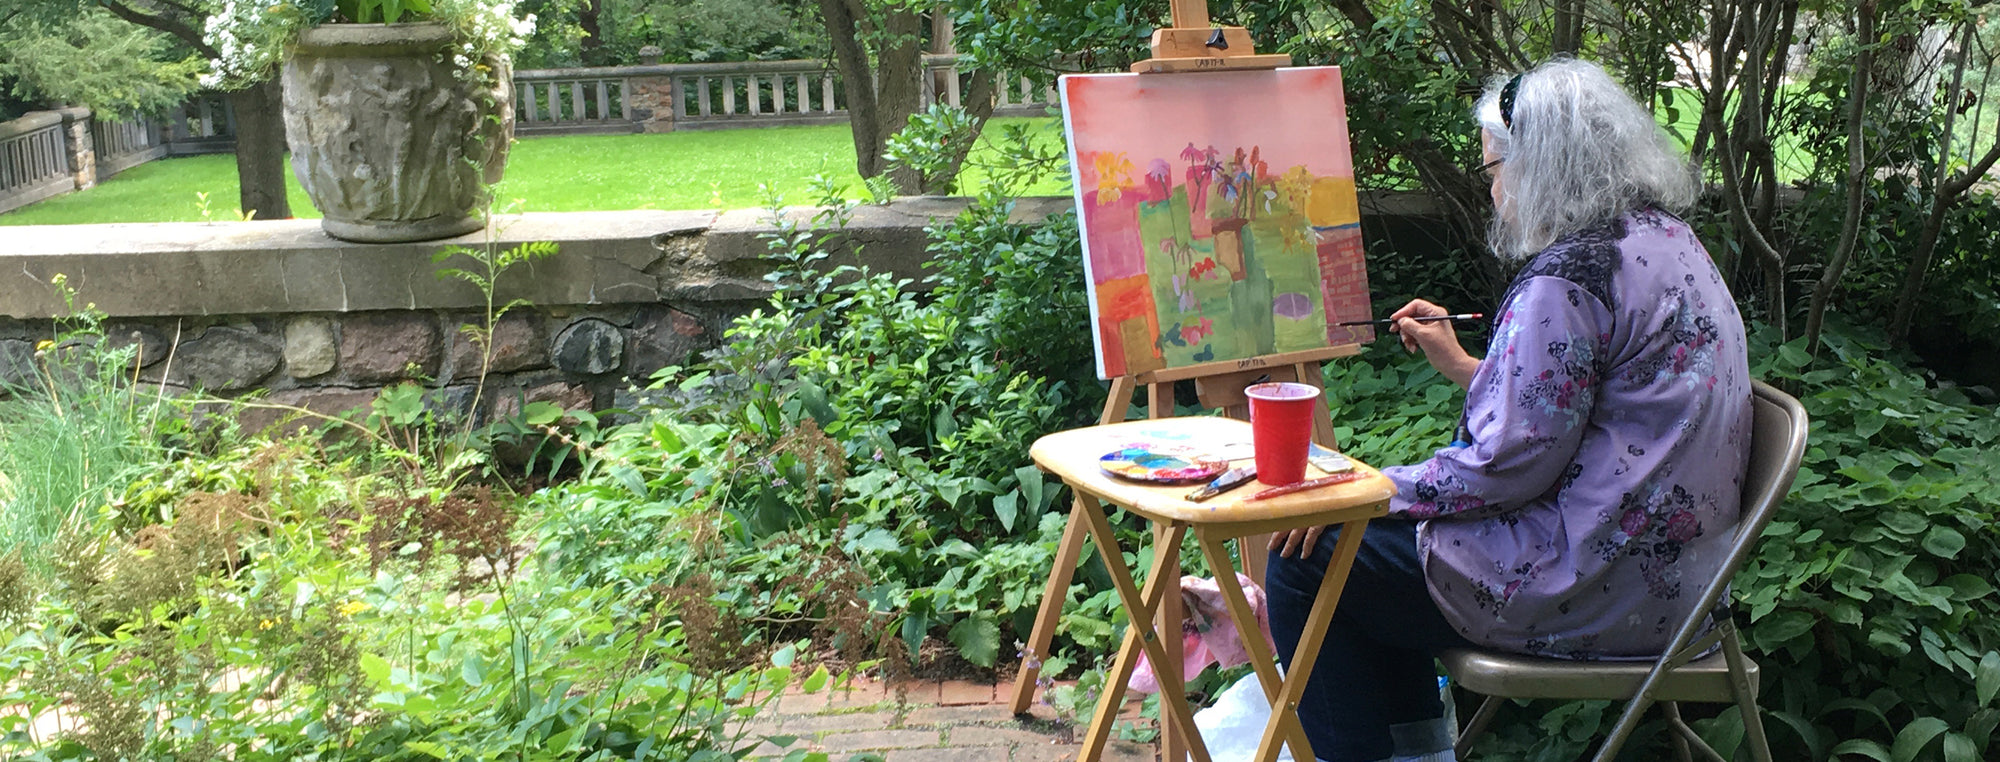 Plein Air Painting at Cranbrook College of Art